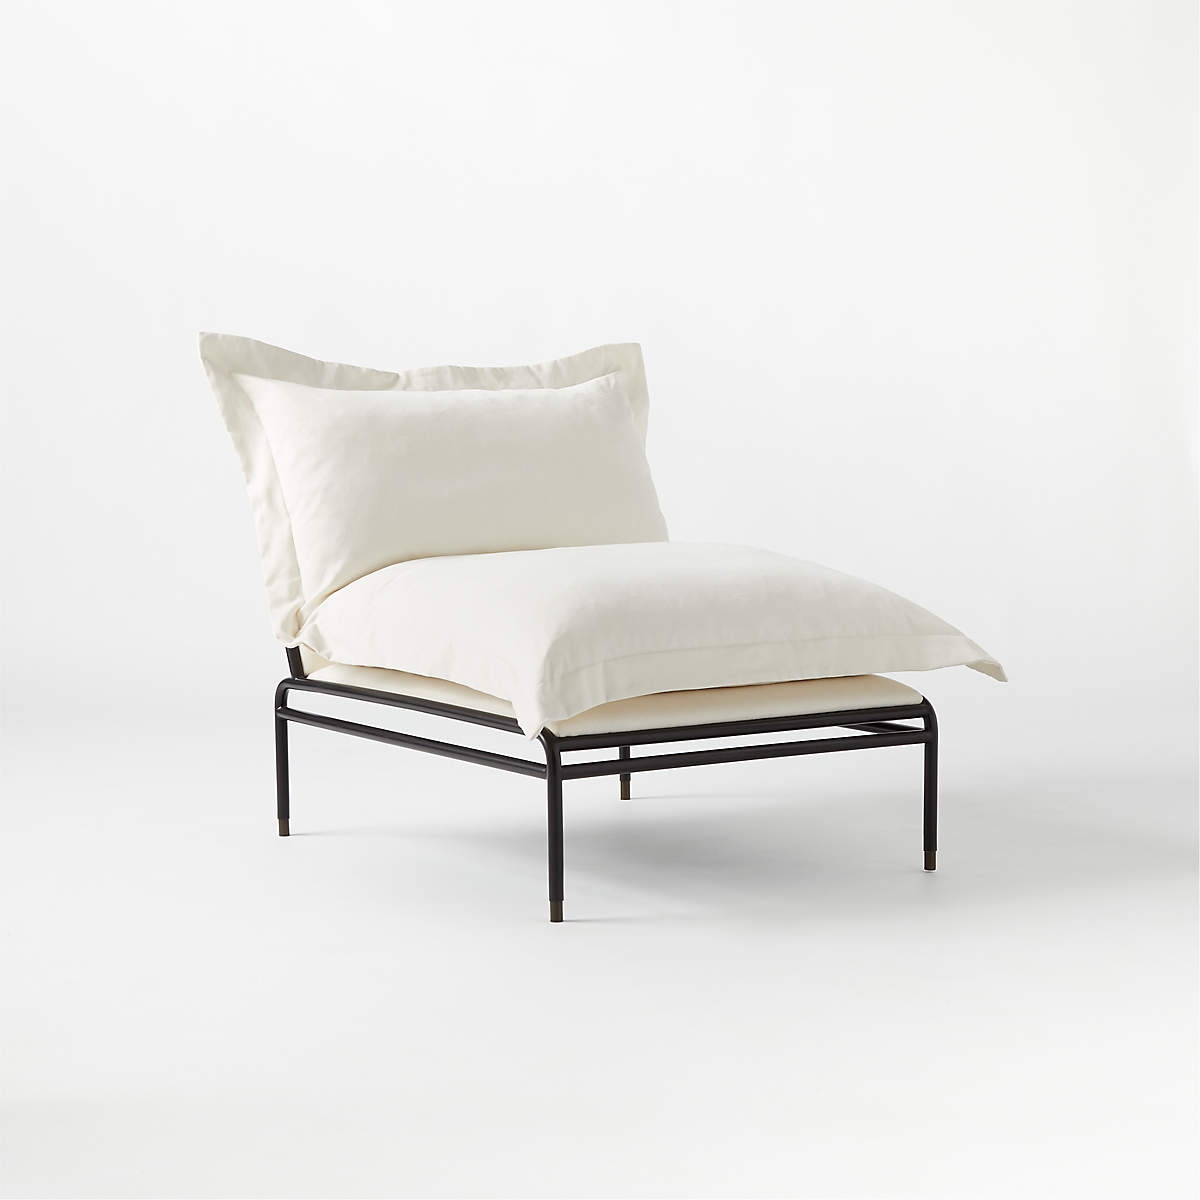 Pillow Lounge Chair Nomad Snow - Image 0